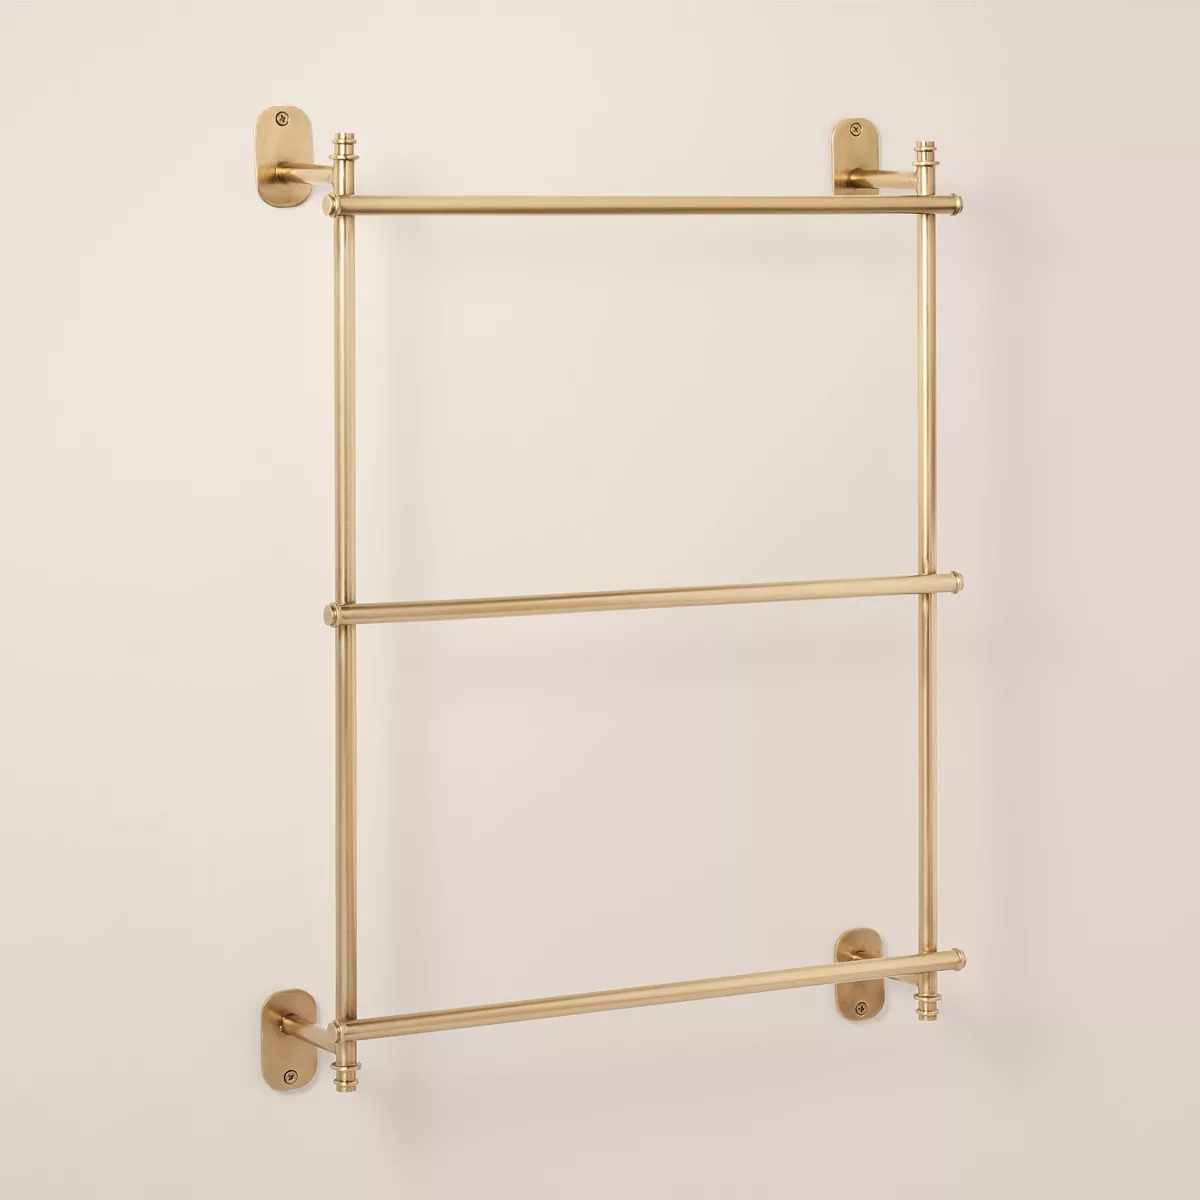 Wall-Mounted Brass Ladder Towel Rack Antique Finish - Hearth & Hand™ with Magnolia | Target